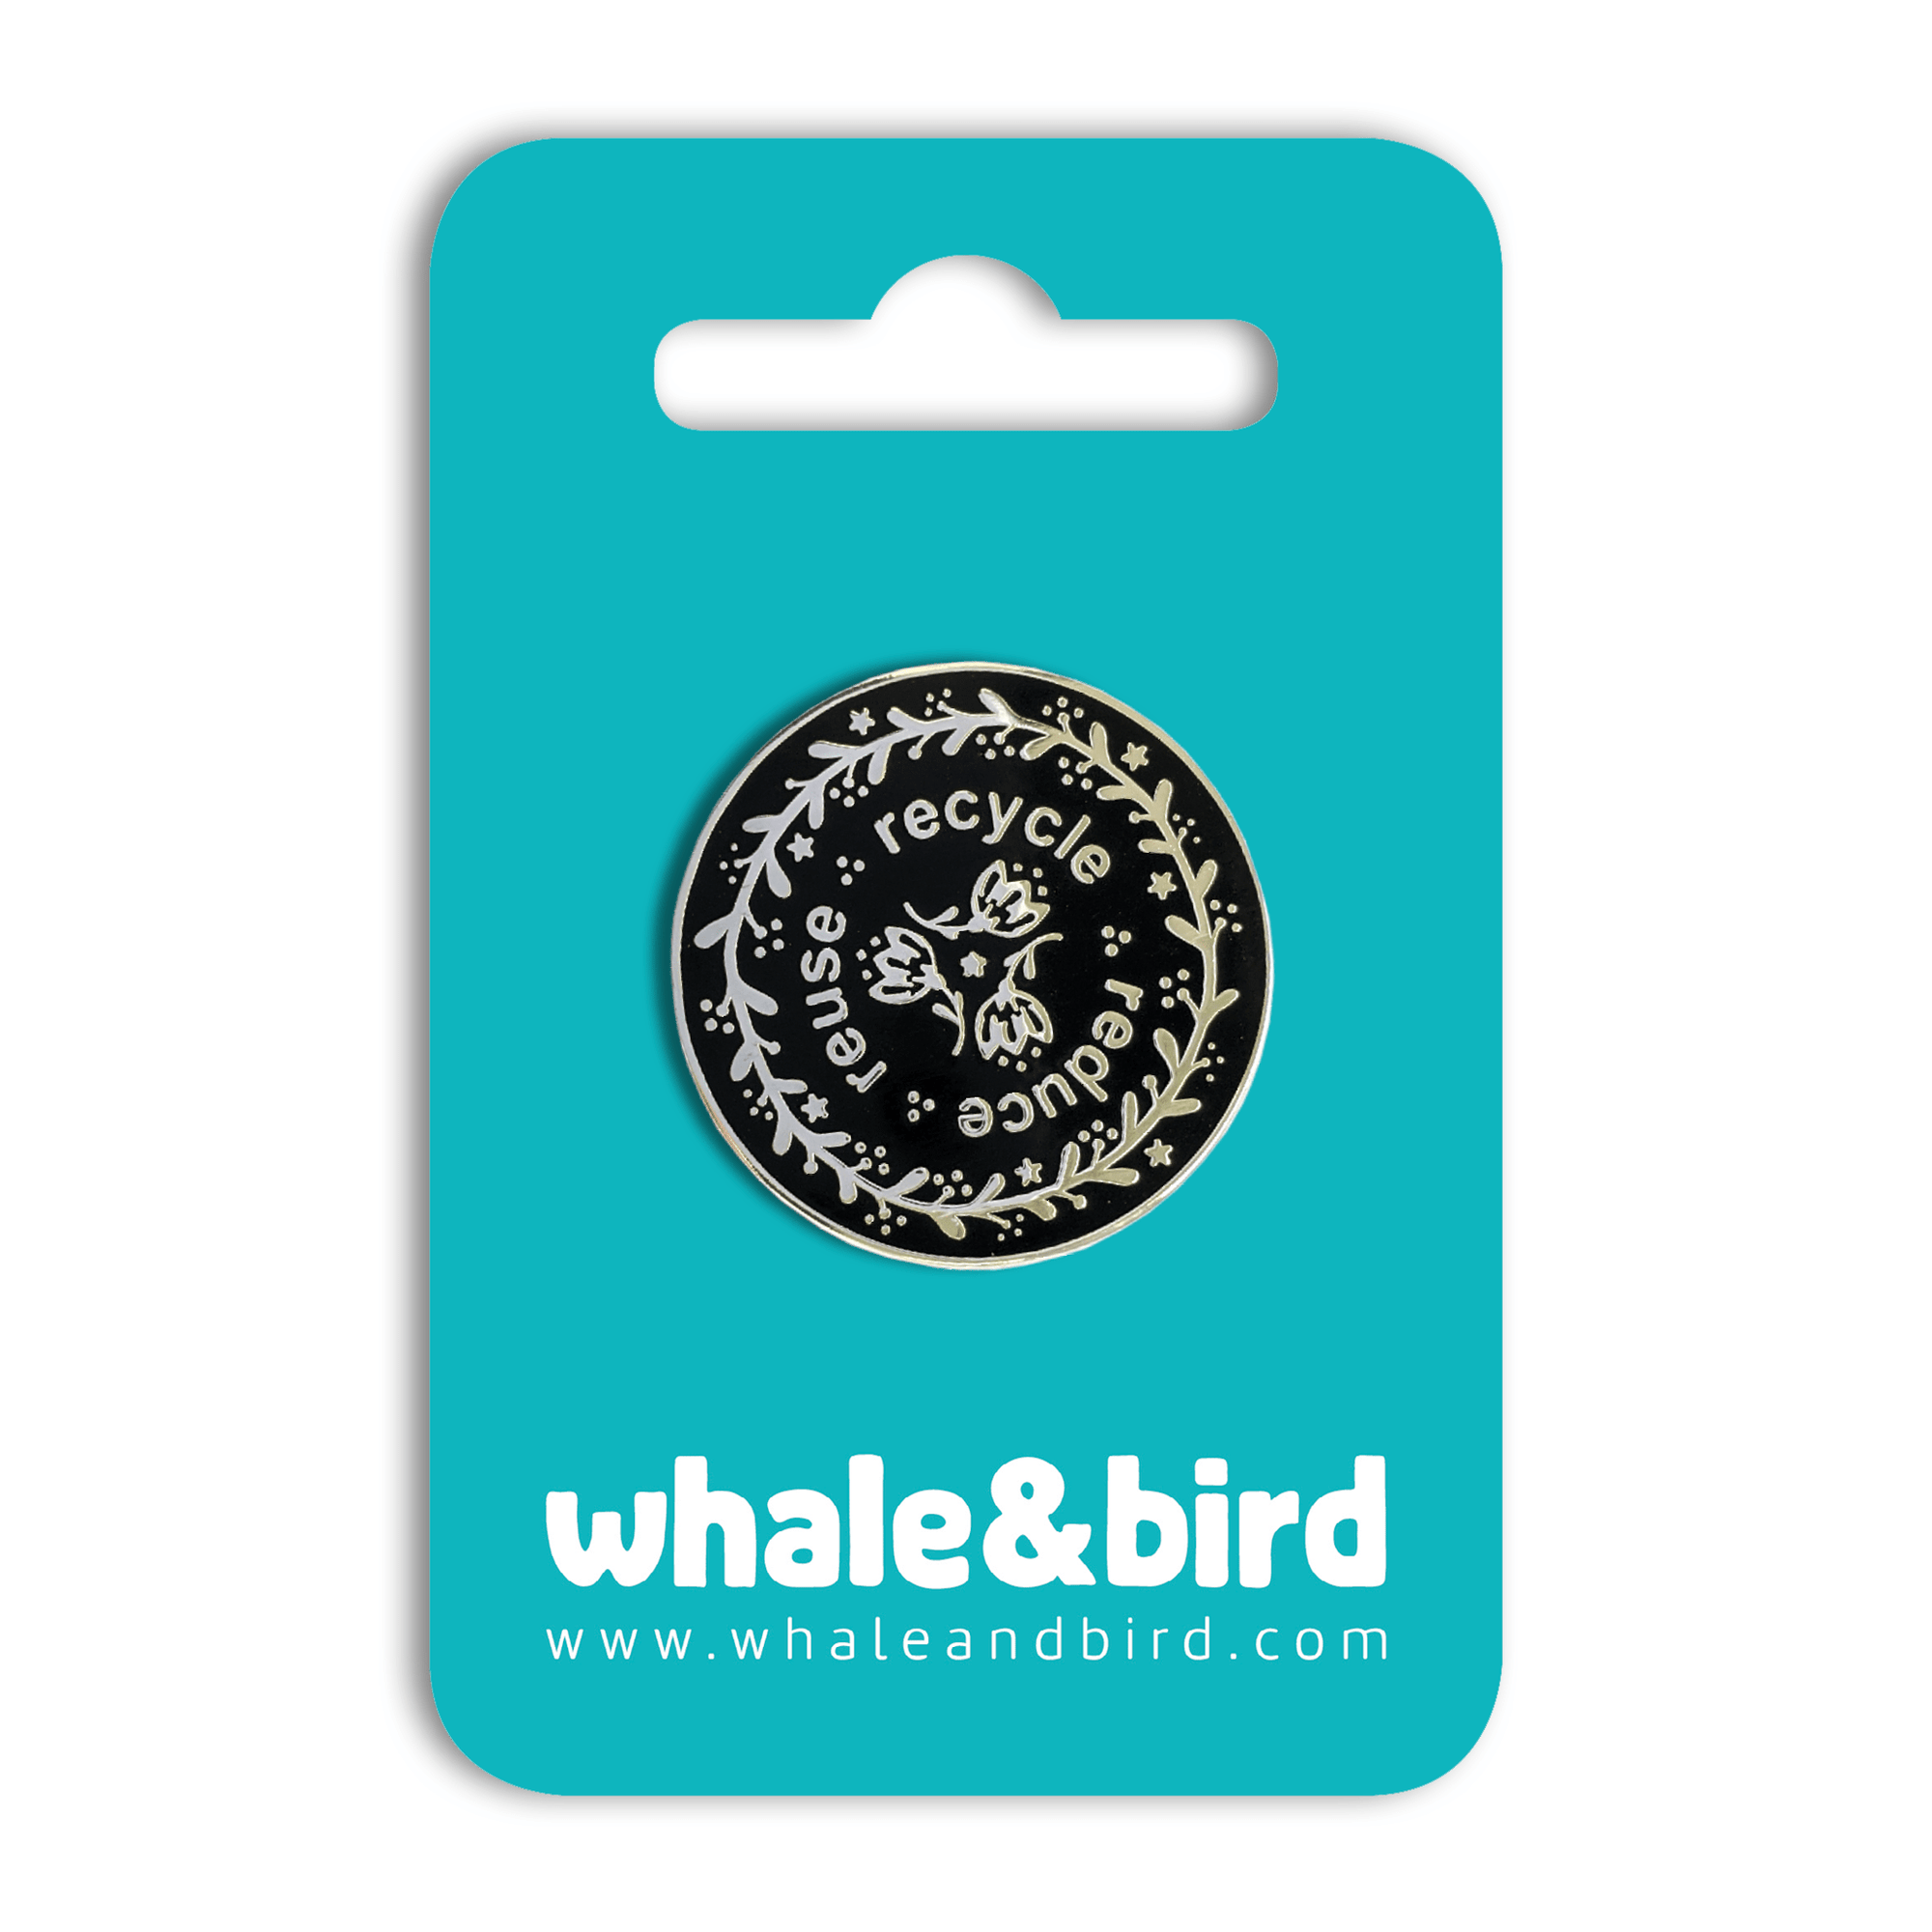 Reduce, Reuse, Recycle Hard Enamel Pin by Mary Joy Harris - Whale and Bird